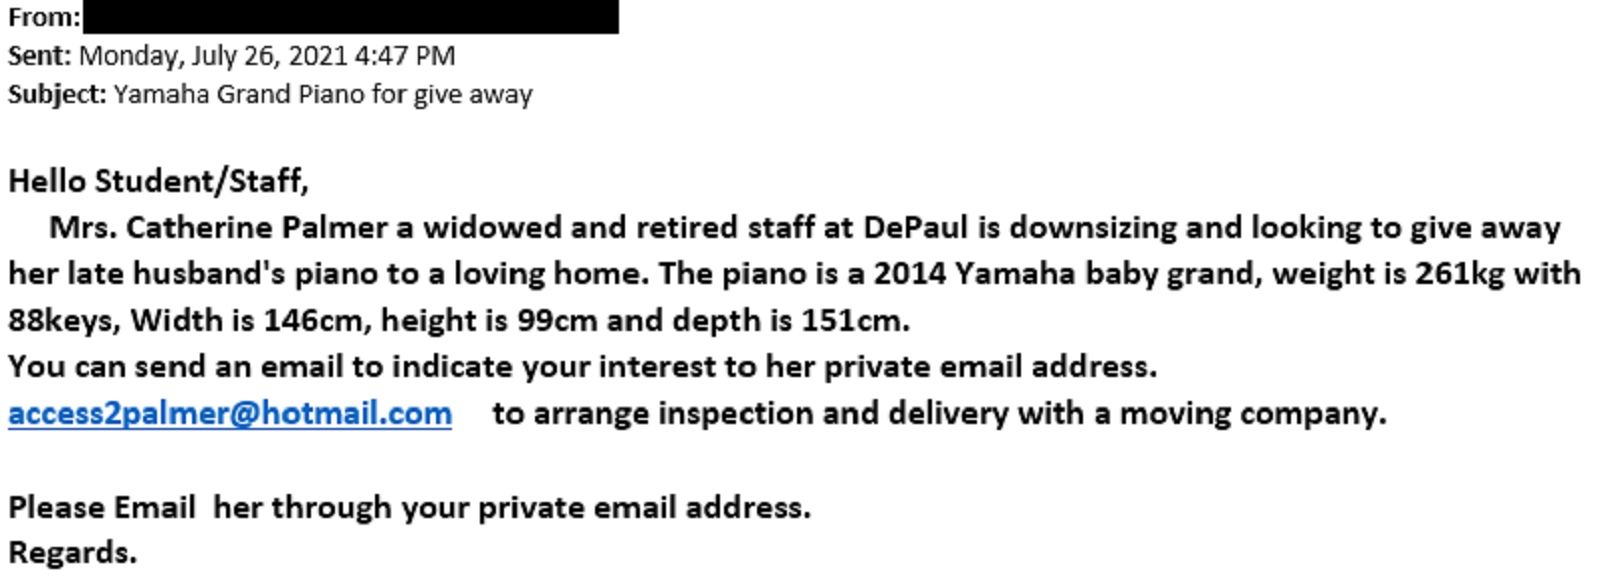 A screenshot of a malicious email. The email text is a malicious attempt to trick recipients into asking for a fake free piano.